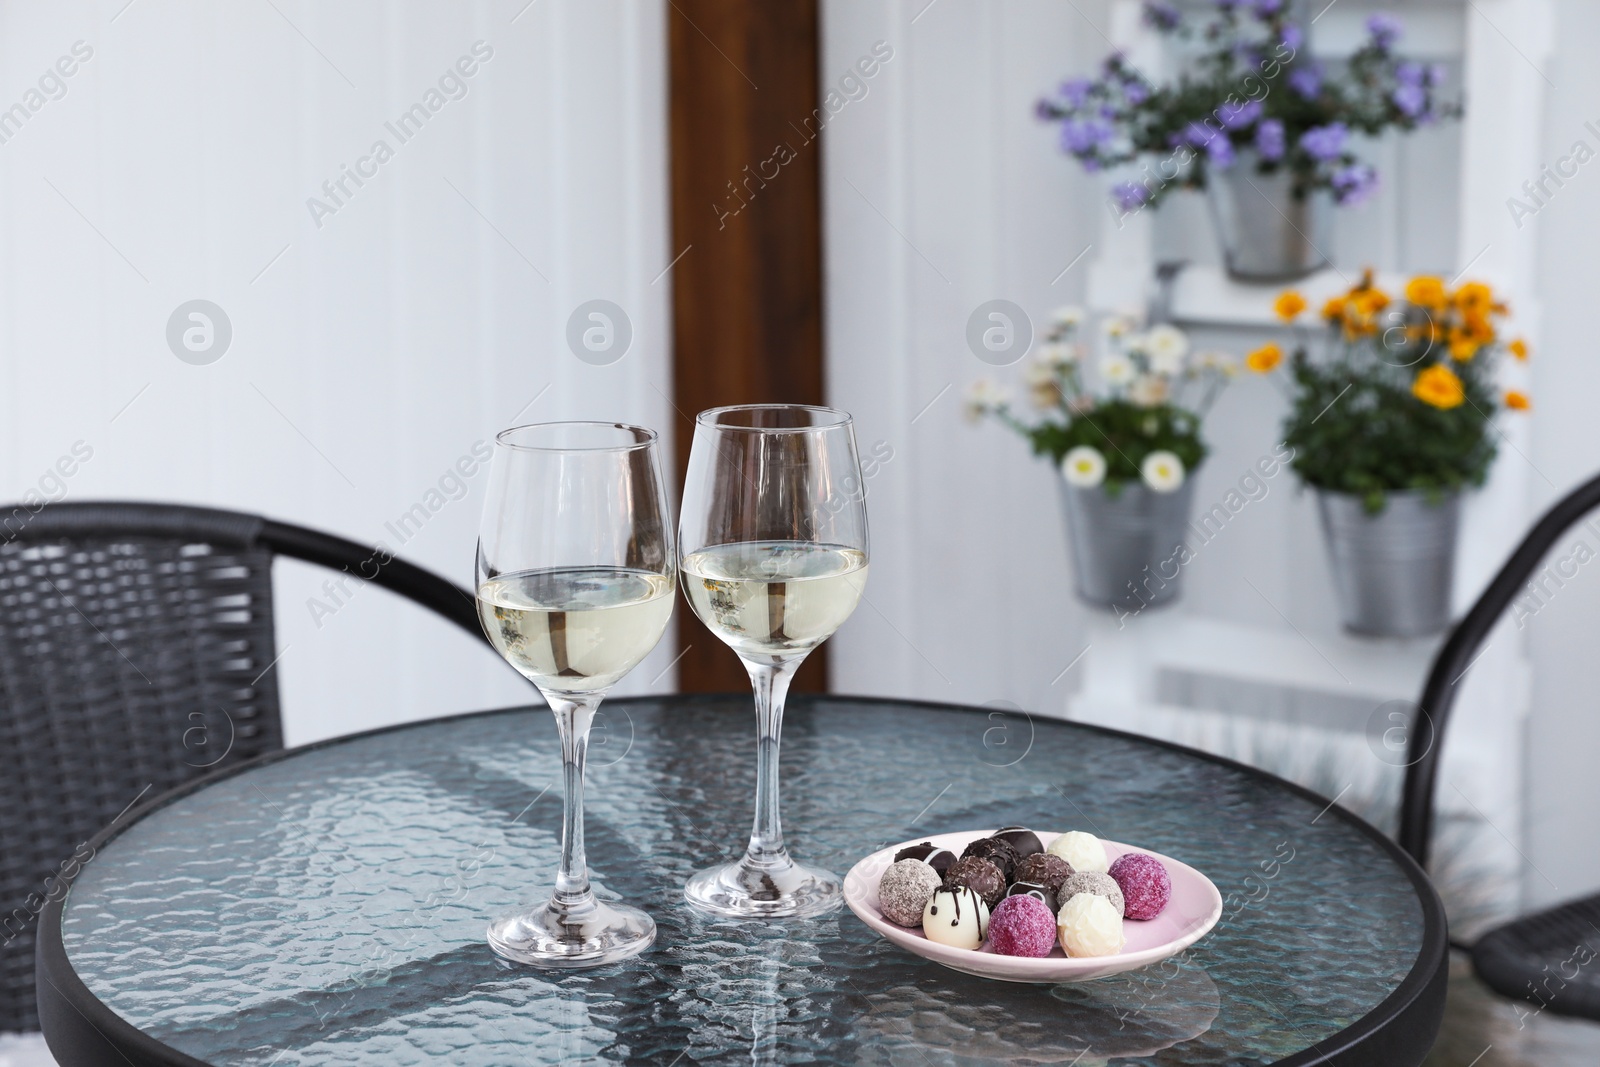 Photo of Glasses of wine and candies on glass table on outdoor terrace